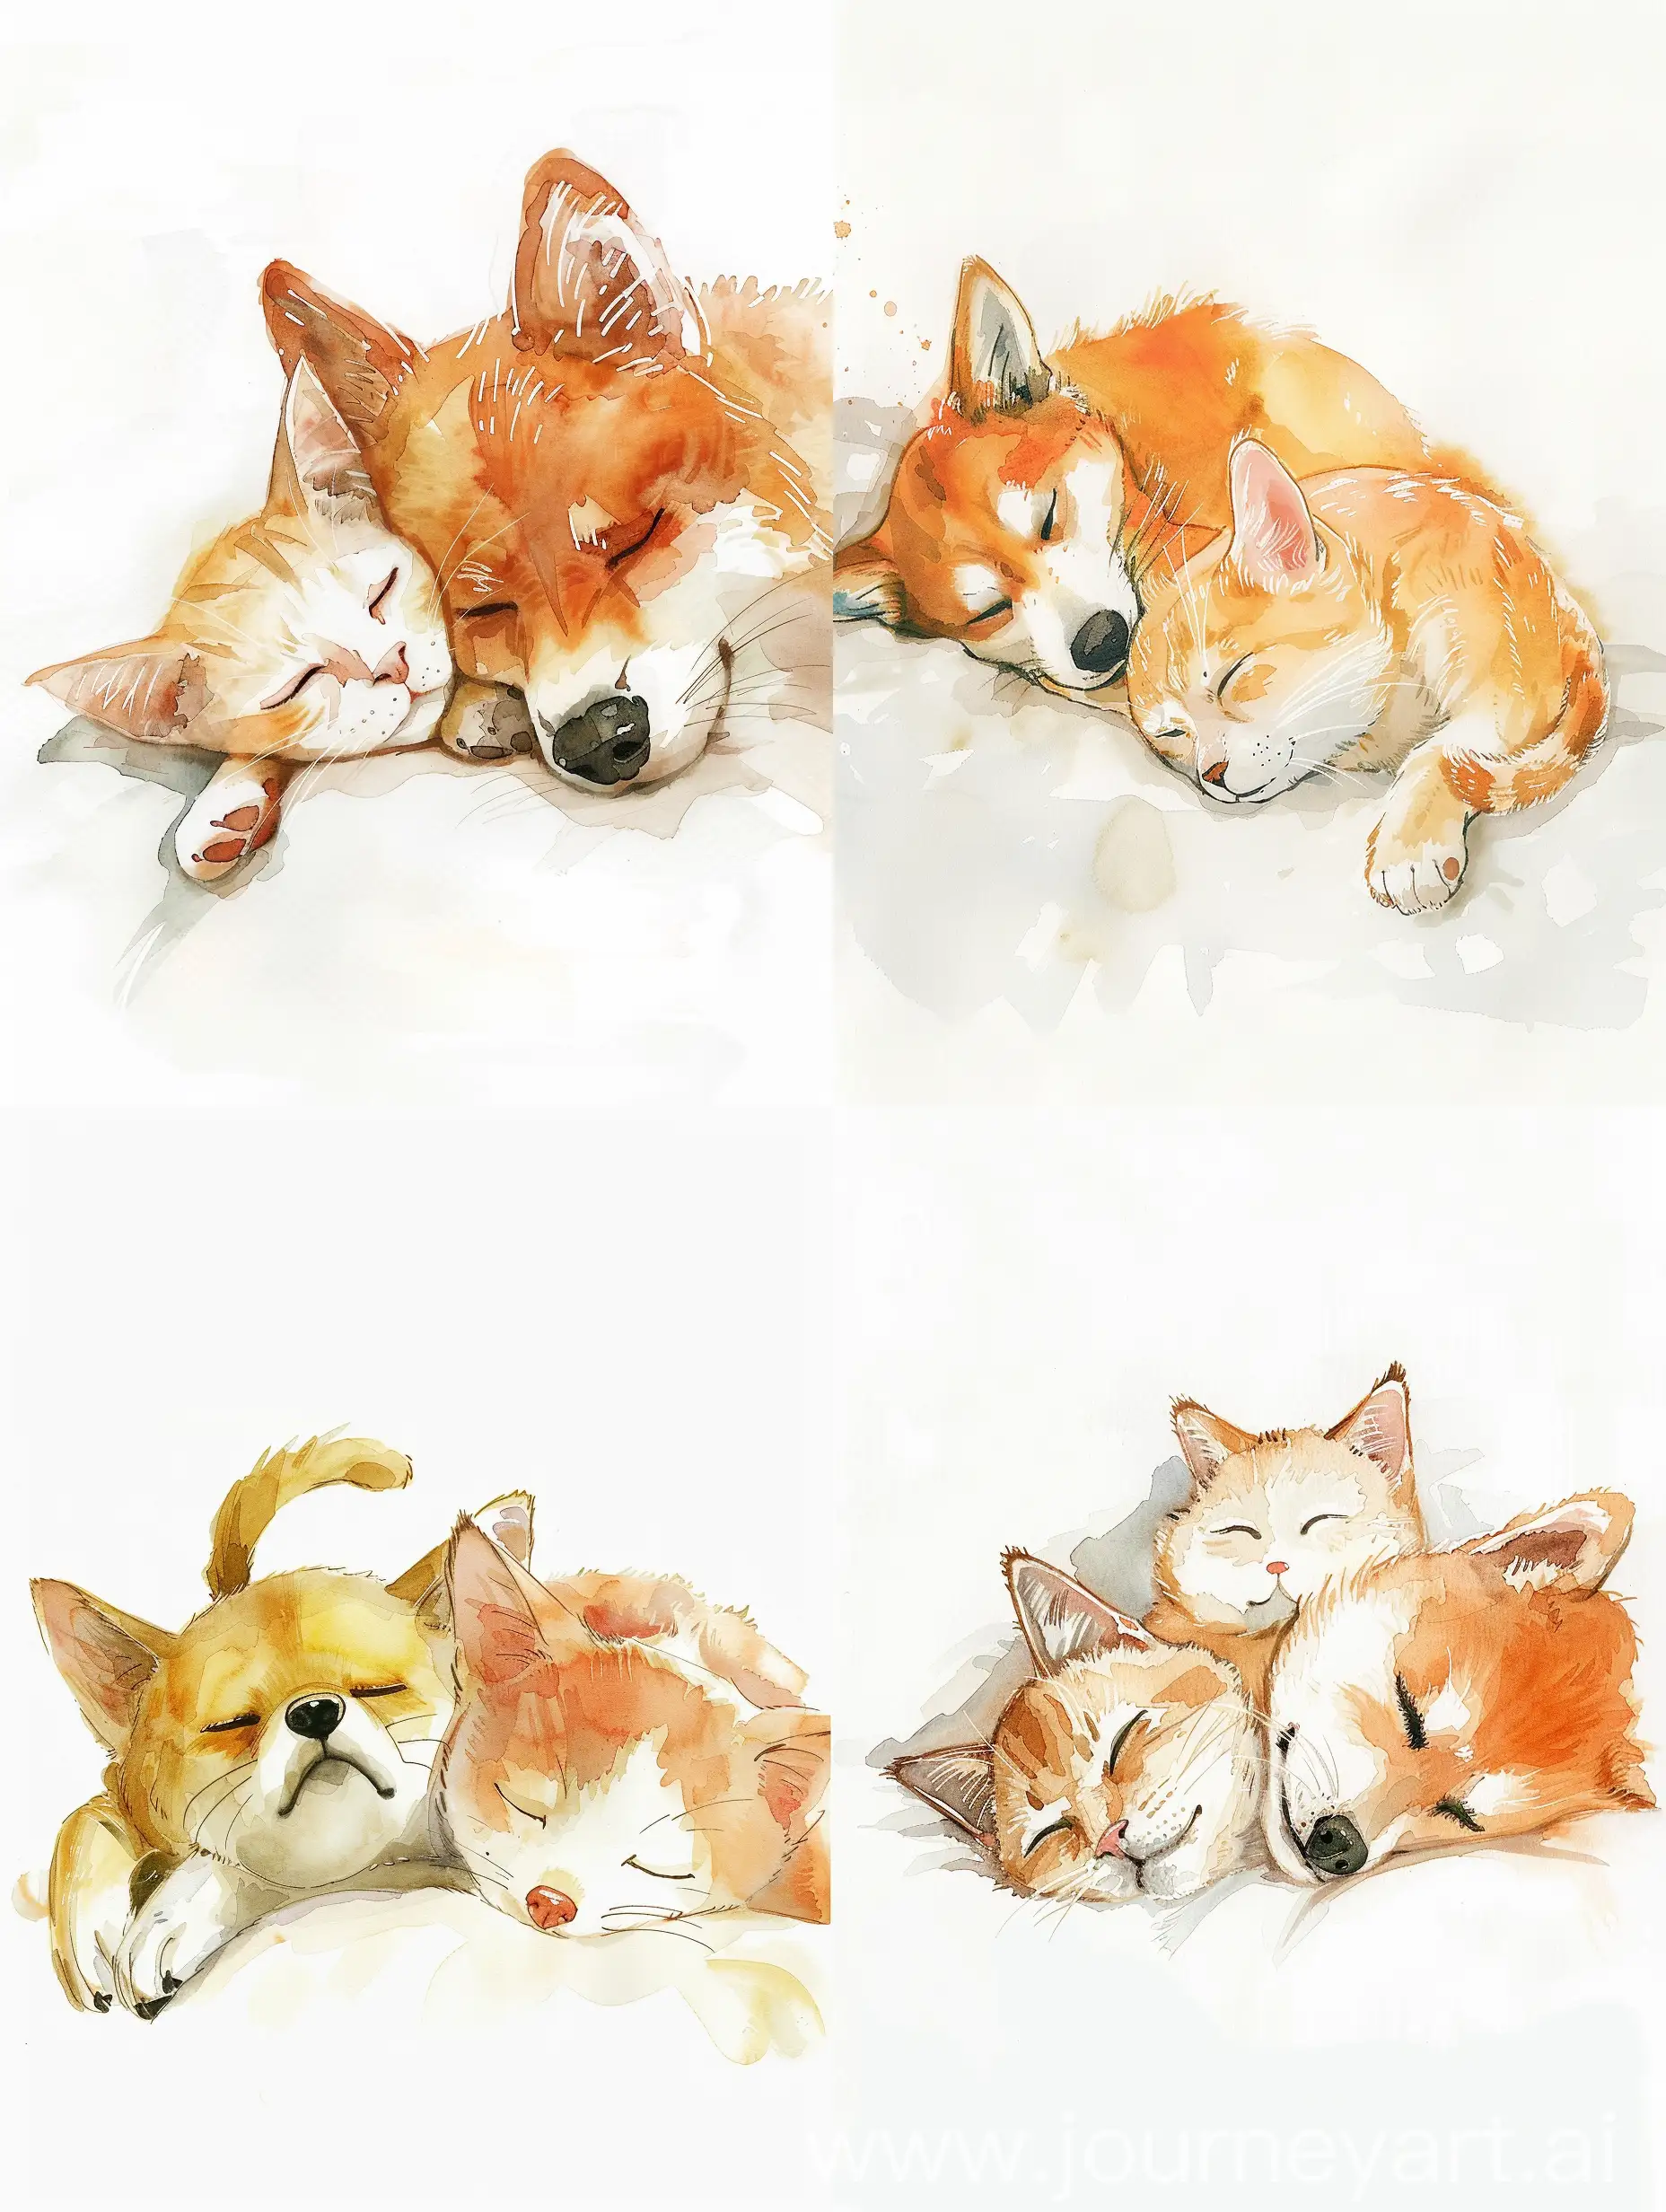 Dreamy-Watercolor-Painting-of-Cat-and-Dog-Sleeping-in-Studio-Ghibli-Style